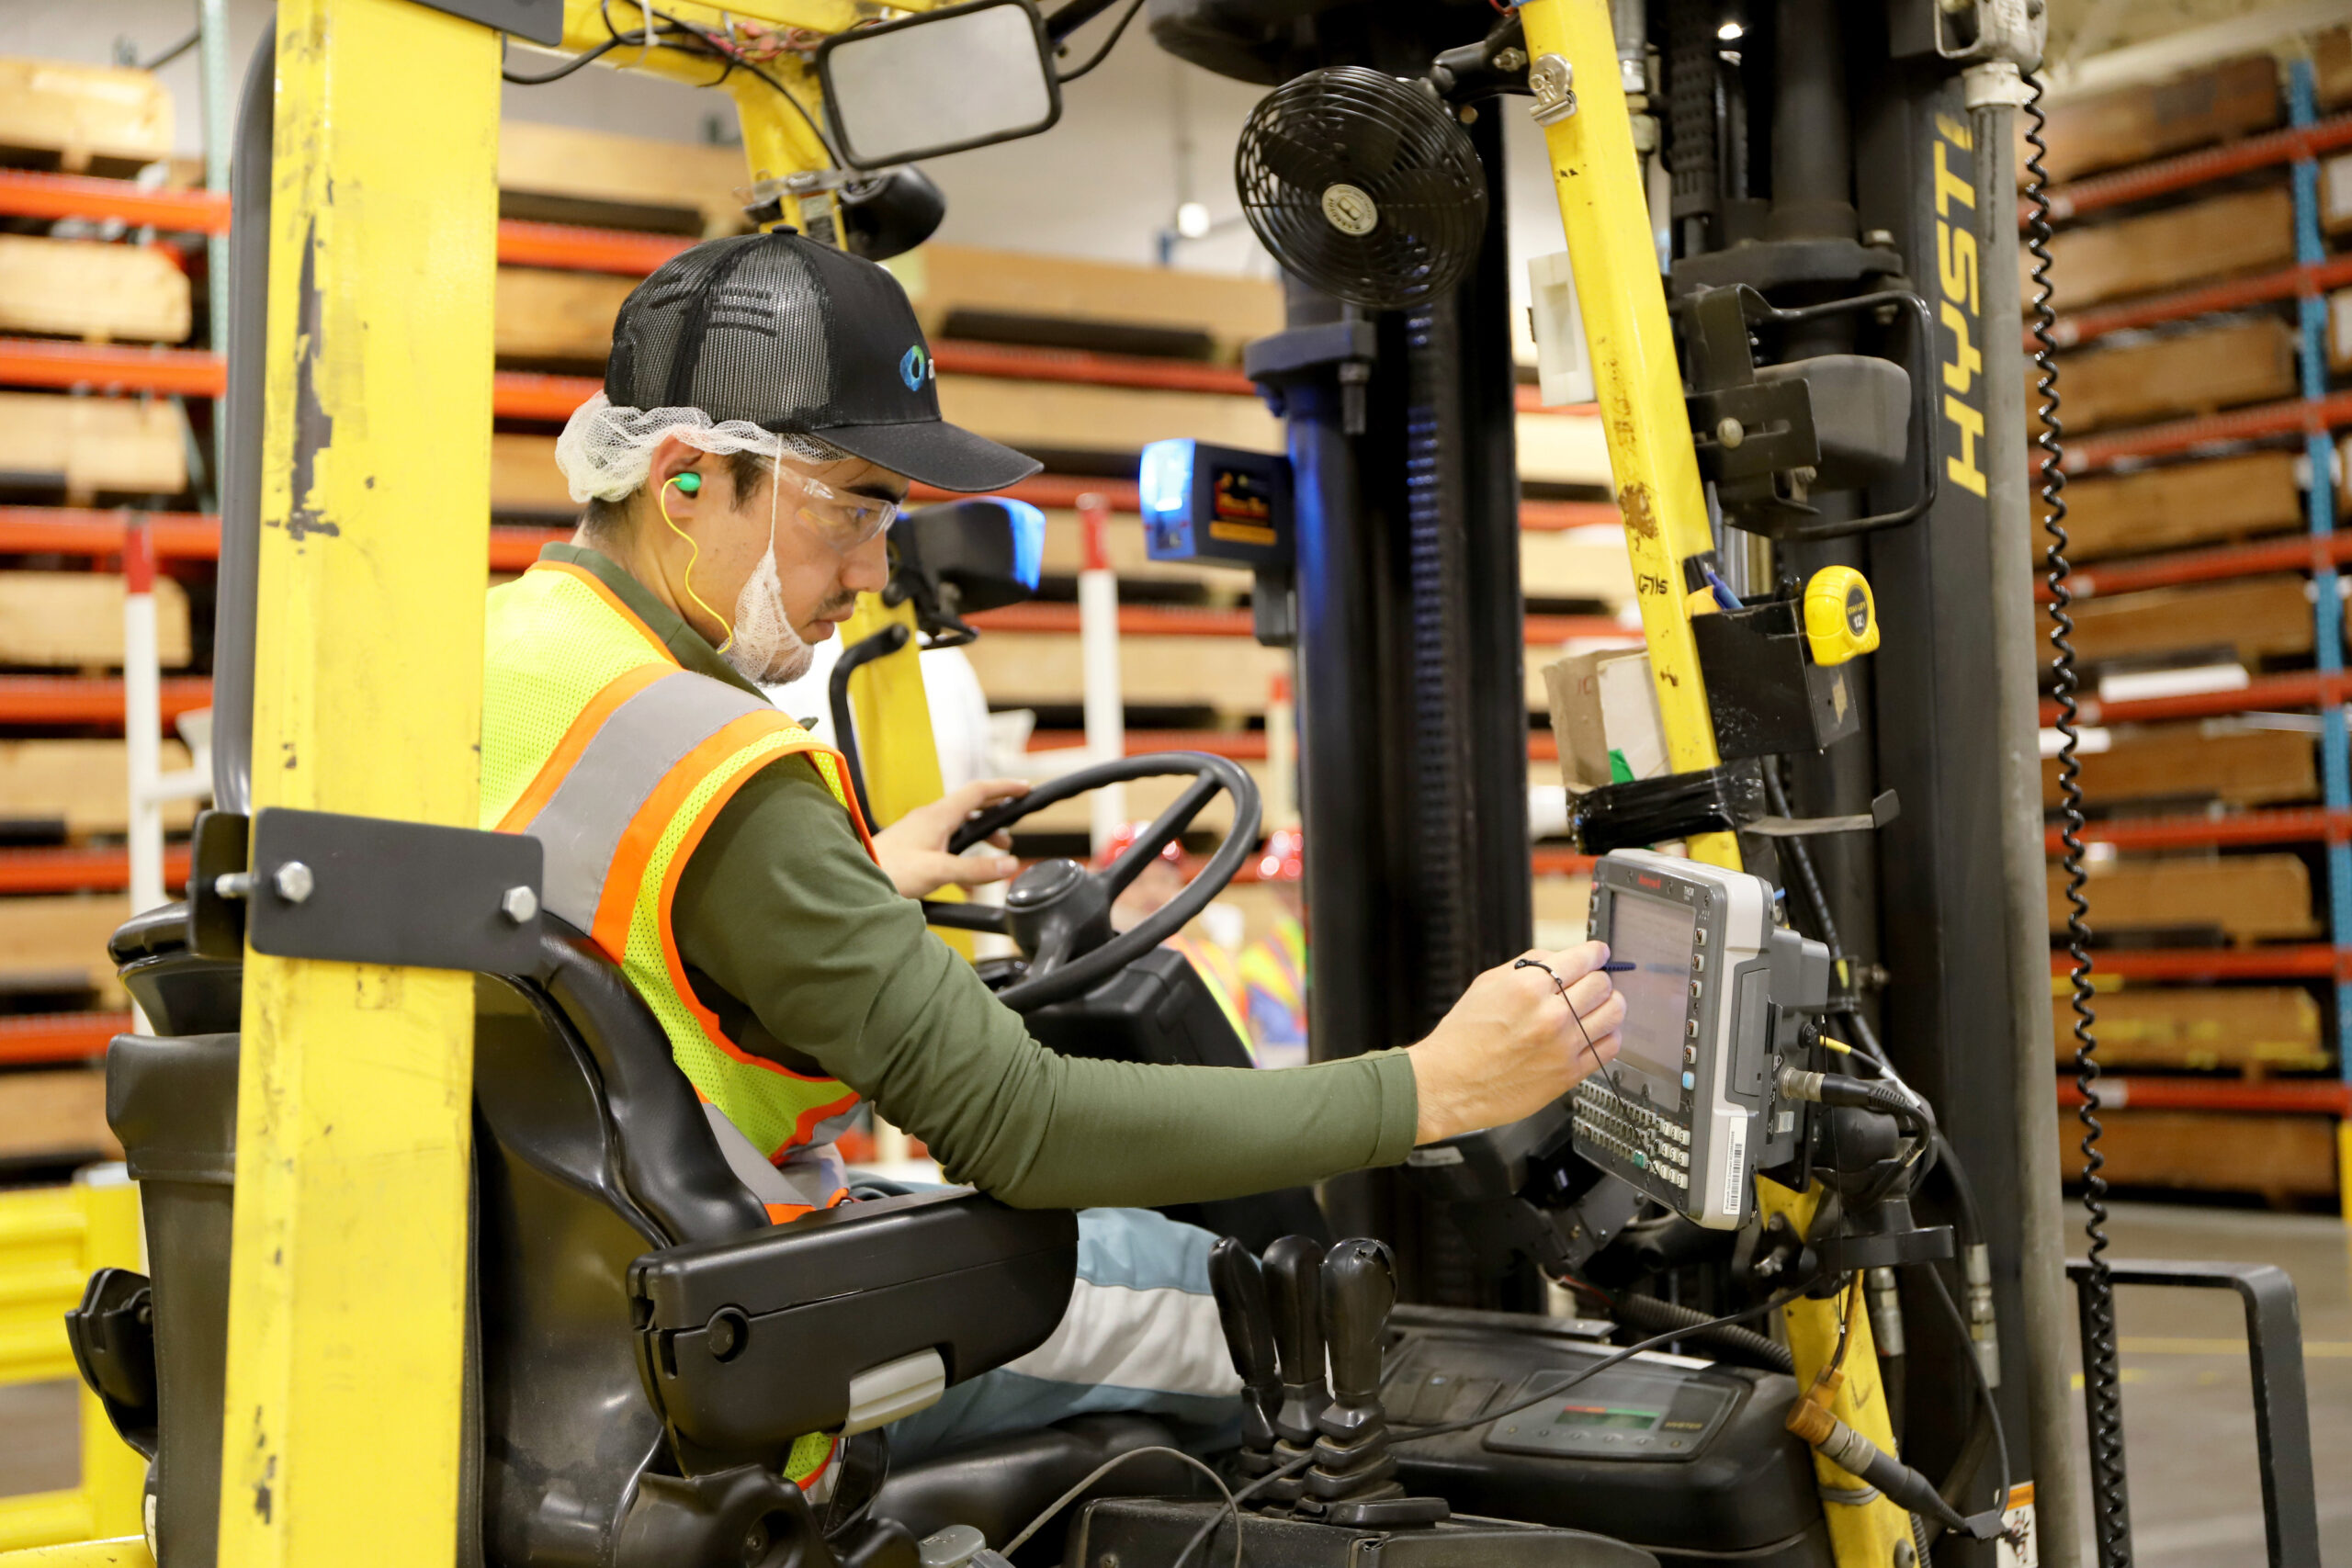 A refugee operates a forklift for a Fox Valley manufacturer.